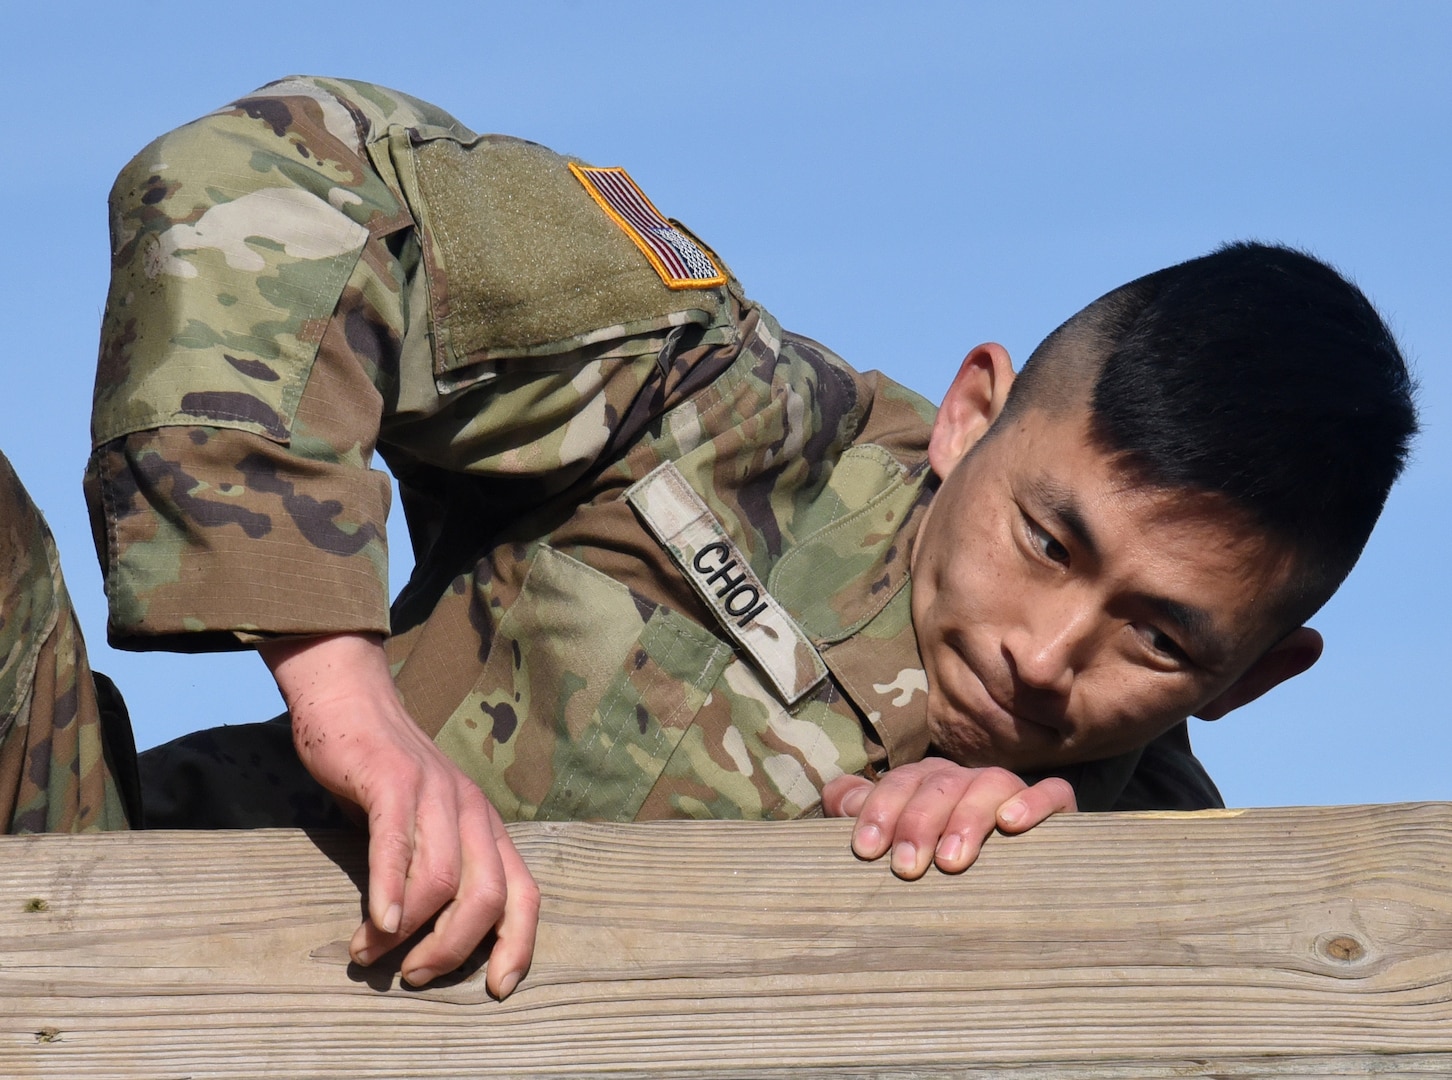 Virginia National Guard Soldiers representing the 116th Infantry Brigade Combat Team and Maneuver Training Center Fort Pickett claim top honors at the 2021 VNG Best Warrior Competition, held March 18-21, 2021, at Fort Pickett, Virginia.